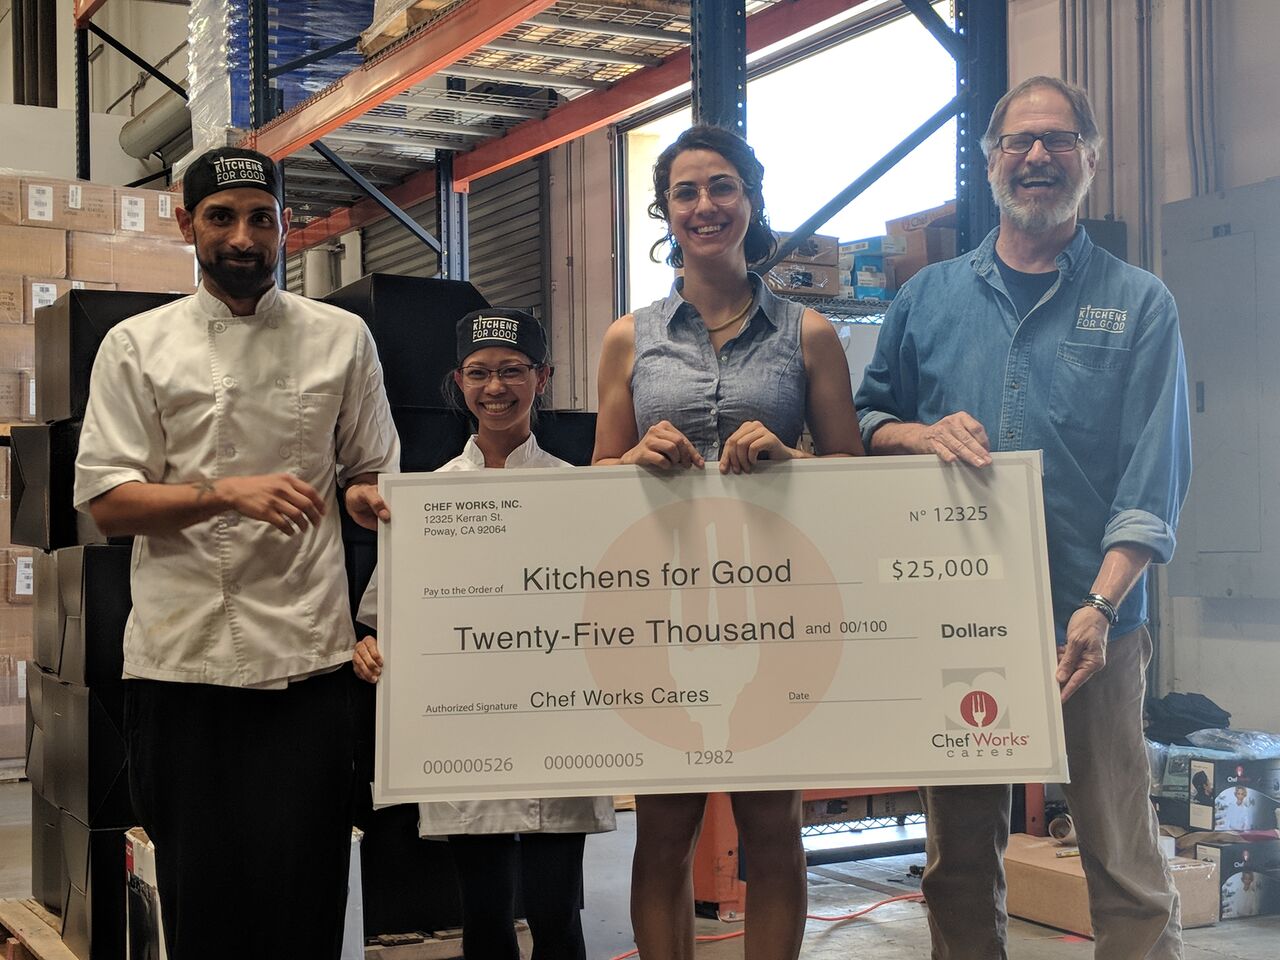 Members of Kitchens for Good accepted their $25,000 check at the Chef Works distribution center in San Diego.